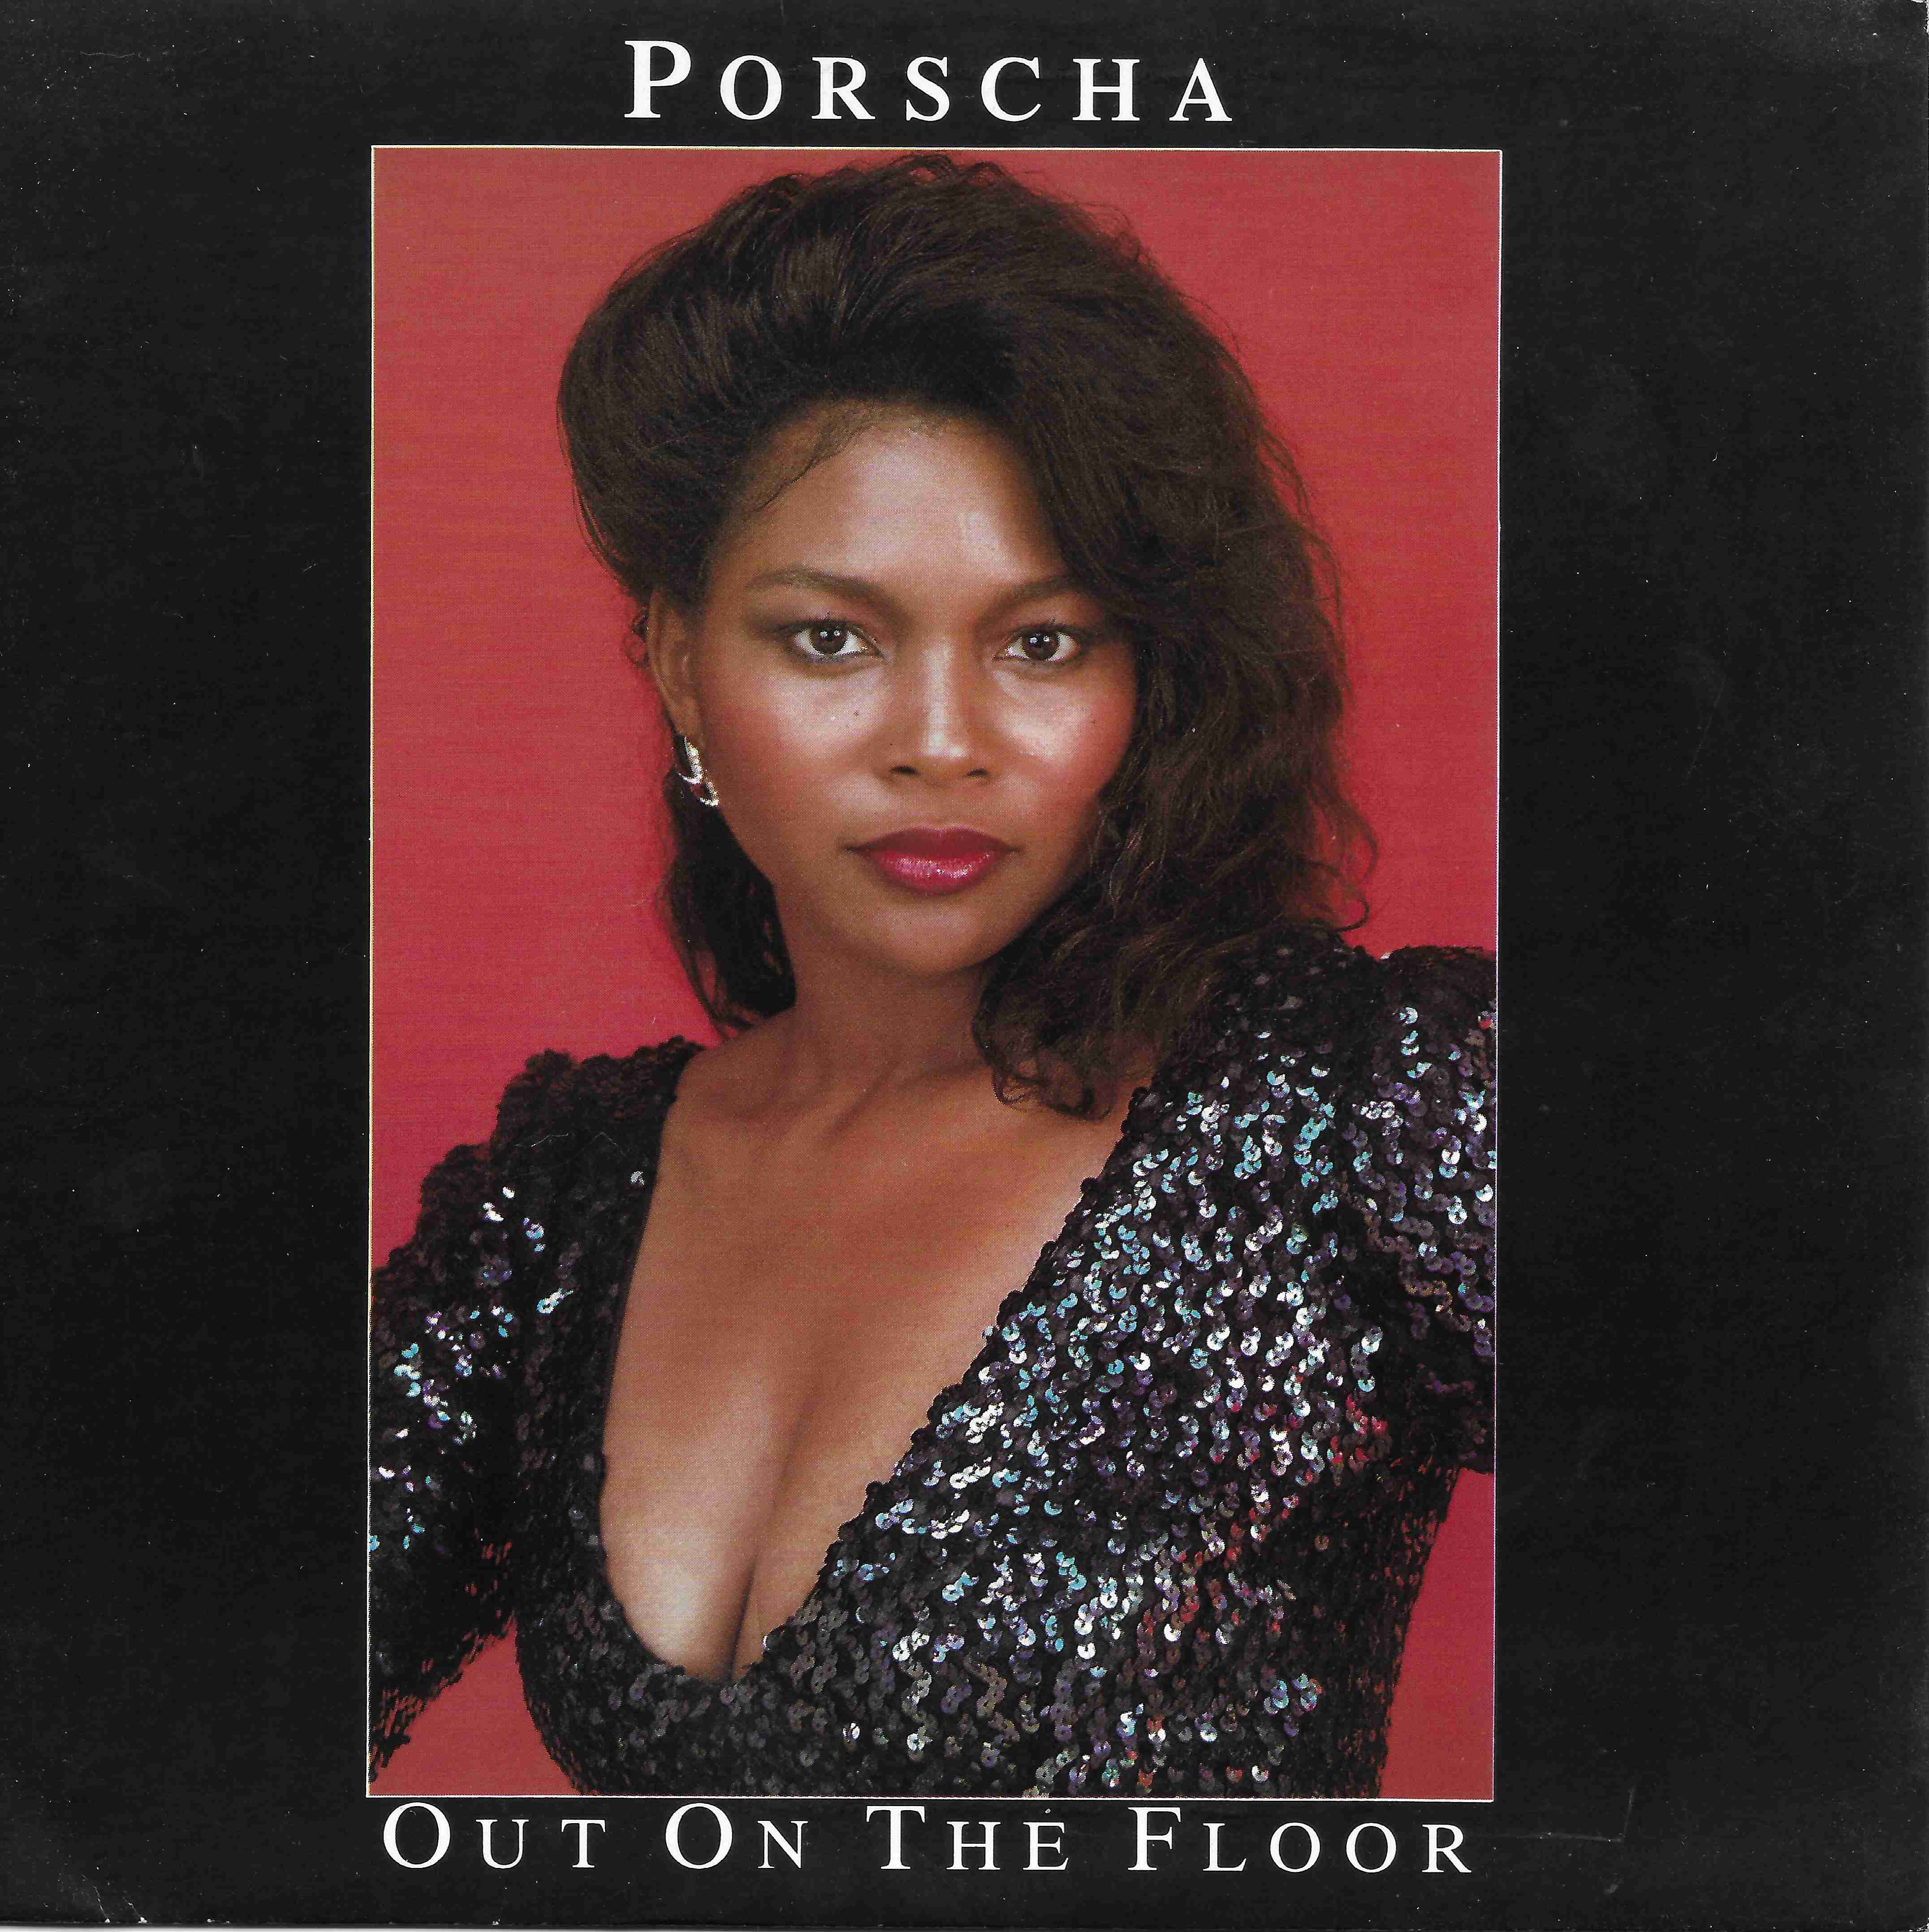 Picture of RESL 241 Out on the floor by artist Porscha from the BBC records and Tapes library